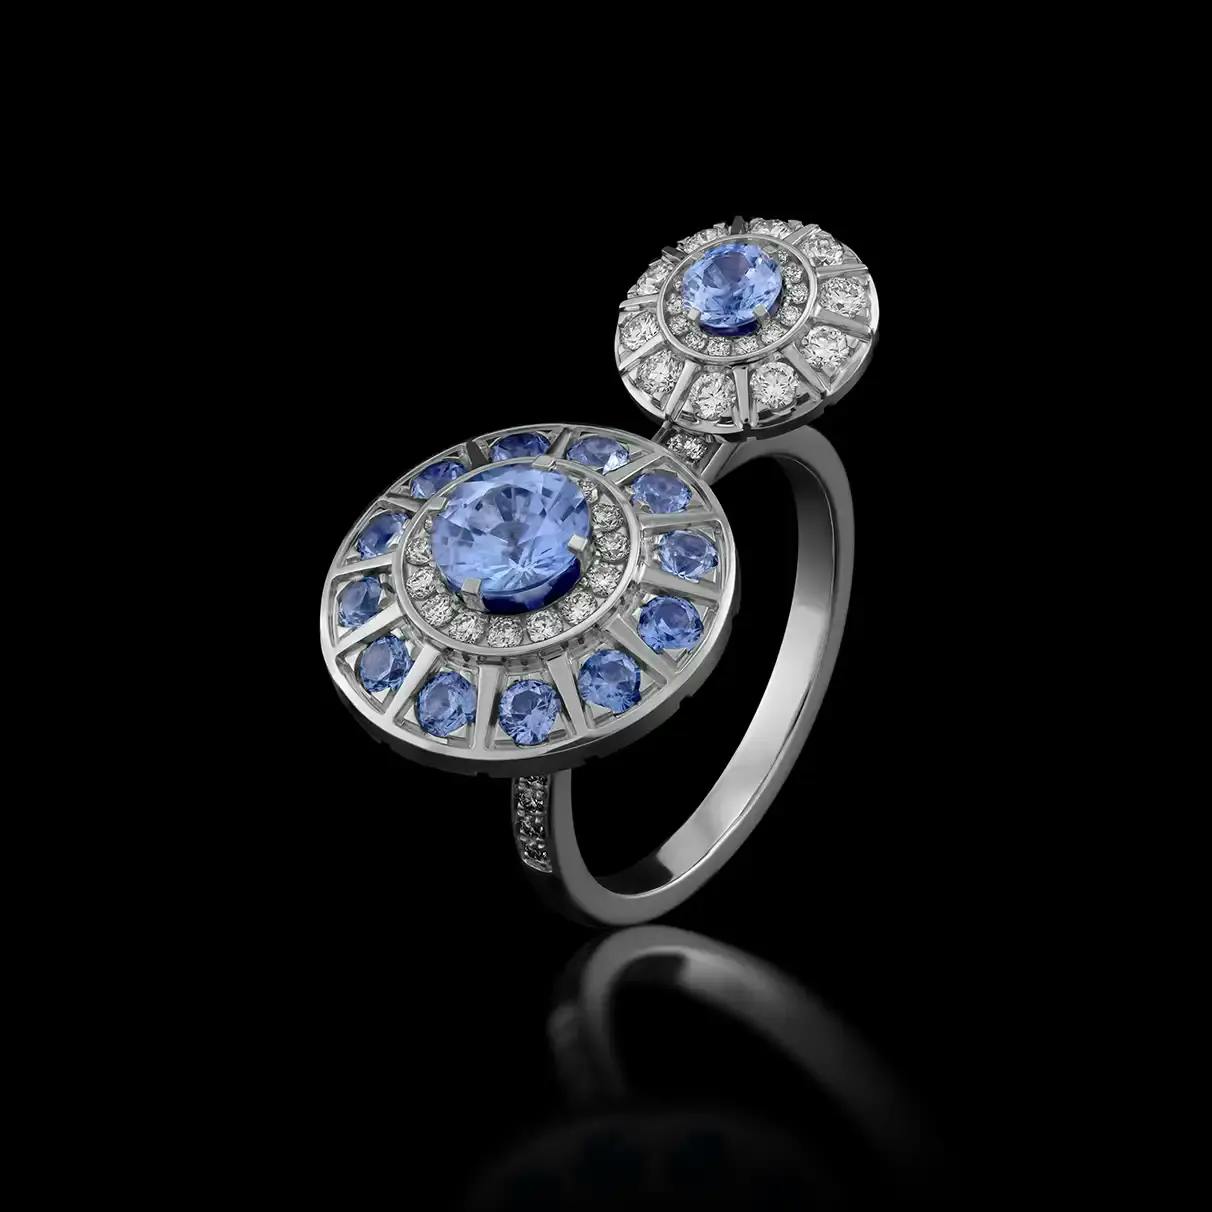 18K recycled white-gold earrings with blue sapphires, pavé diamonds.